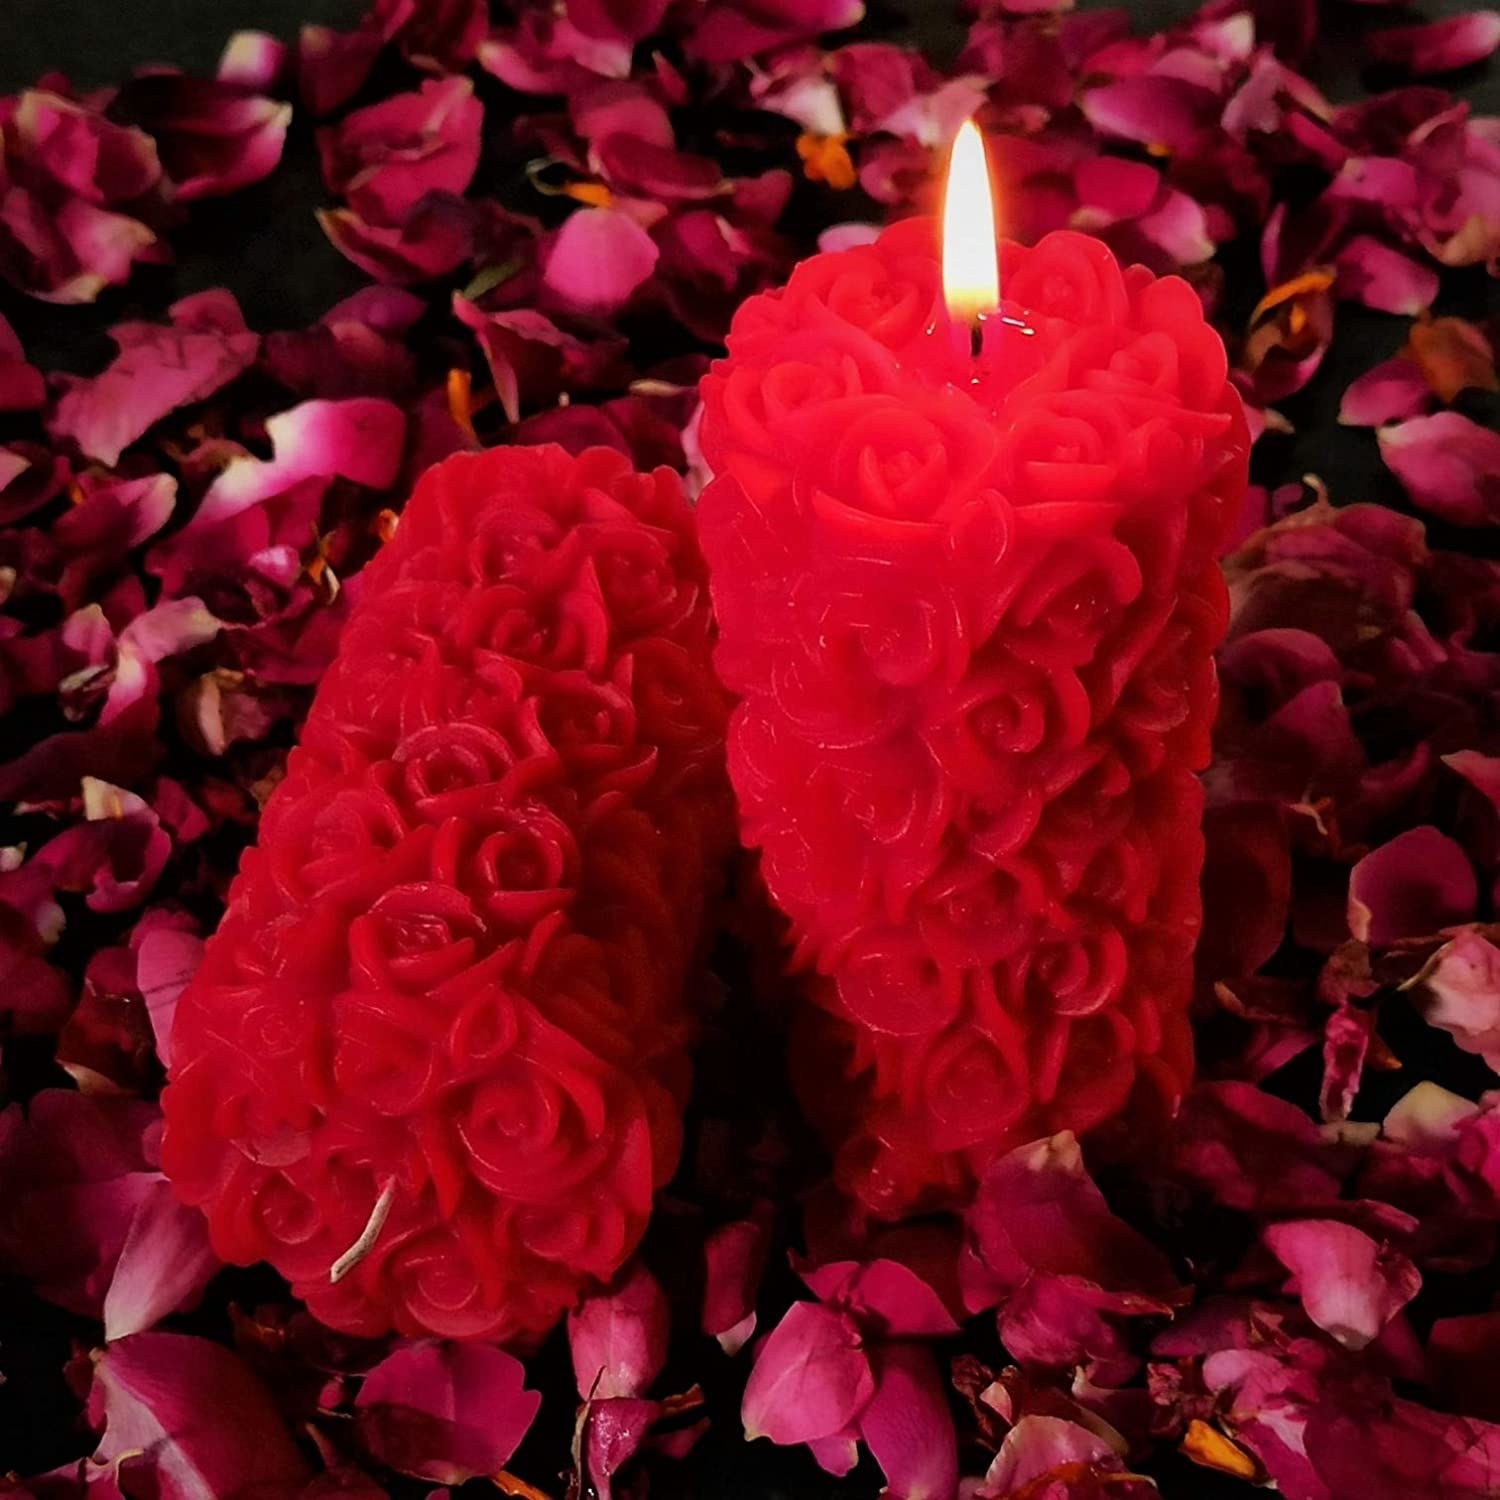 Bright red candles with little wax roses on their surface.